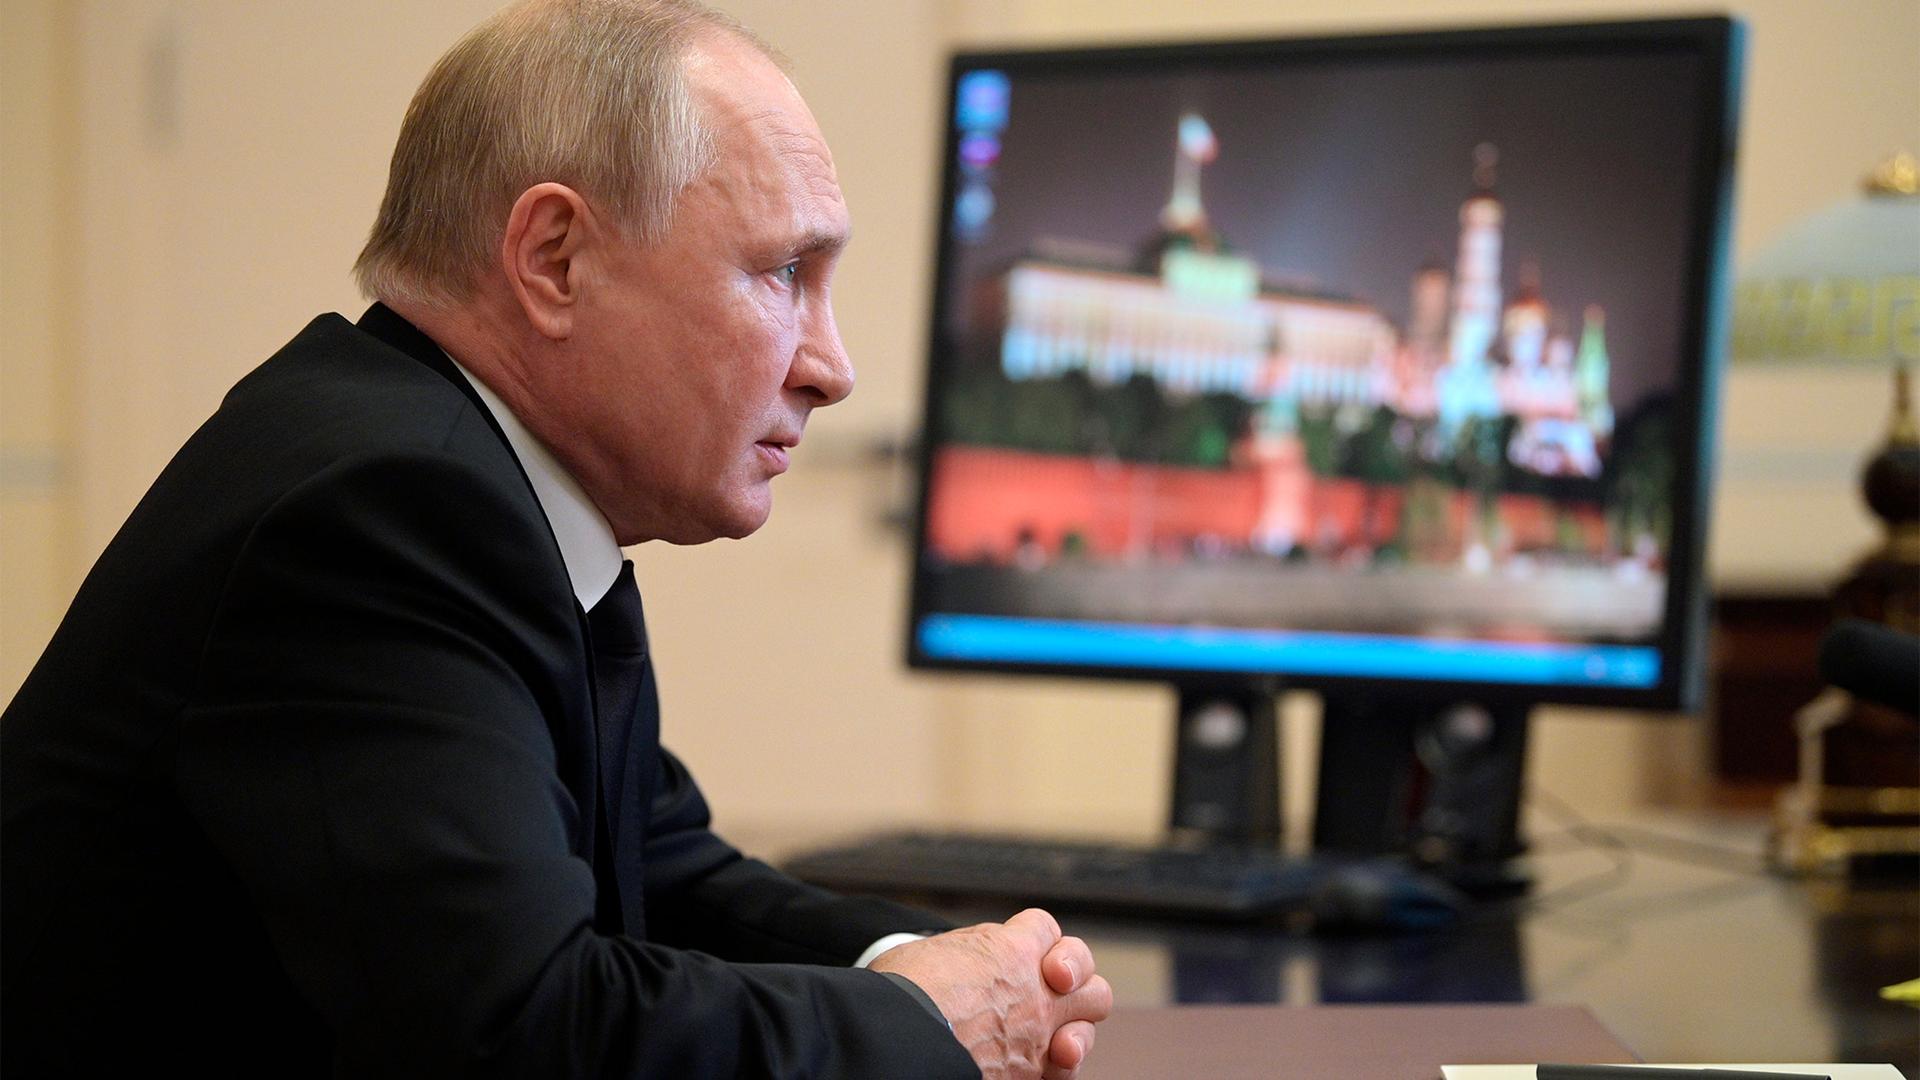 Russian President Vladimir Putin speaks to Ella Pamfilova, head of Russian Central Election Commission during their meeting via video conference at the Novo-Ogaryovo residence outside Moscow, Russia